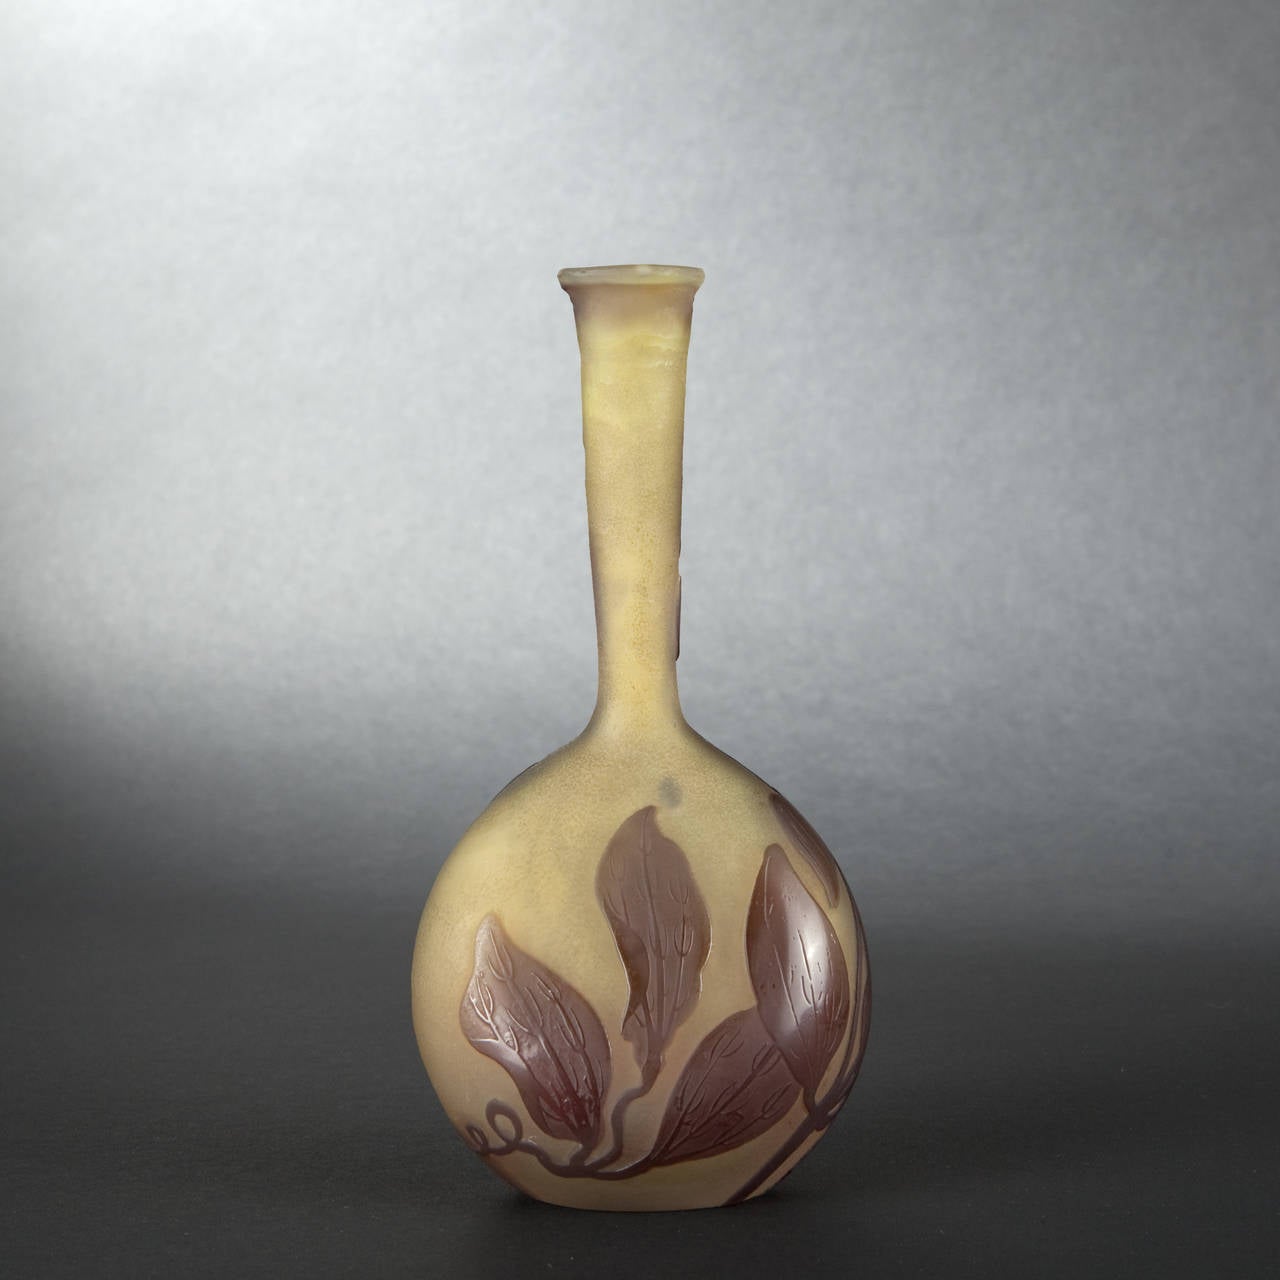 Emile GALLE (1846-1904) 

Soliflore vase with slightly flattened ovoid base. Industrial proof realized in brown glass overlaid against an absinthe-colored ground. Acid-etched iris cameo decoration. Signed. 

Height: 17 cm (6-2/3 in.) - Width : 8